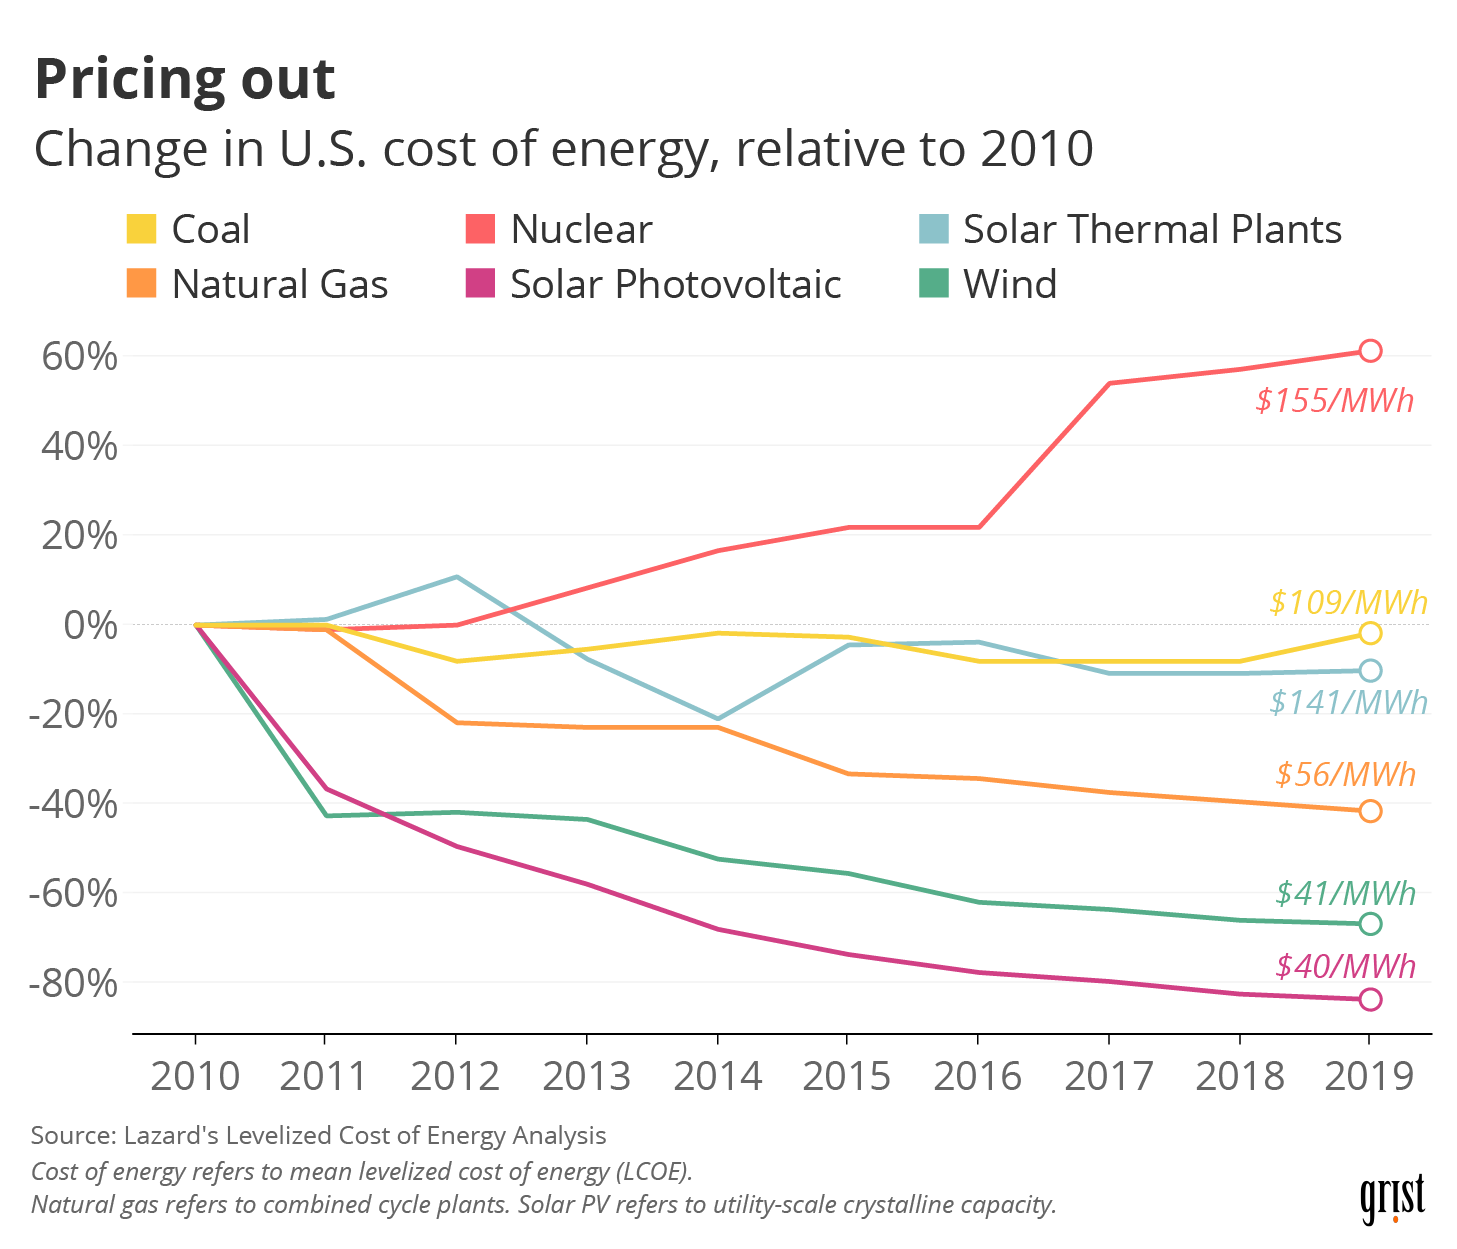 A chart showing the change in U.S. cost of energy, relative to 2010